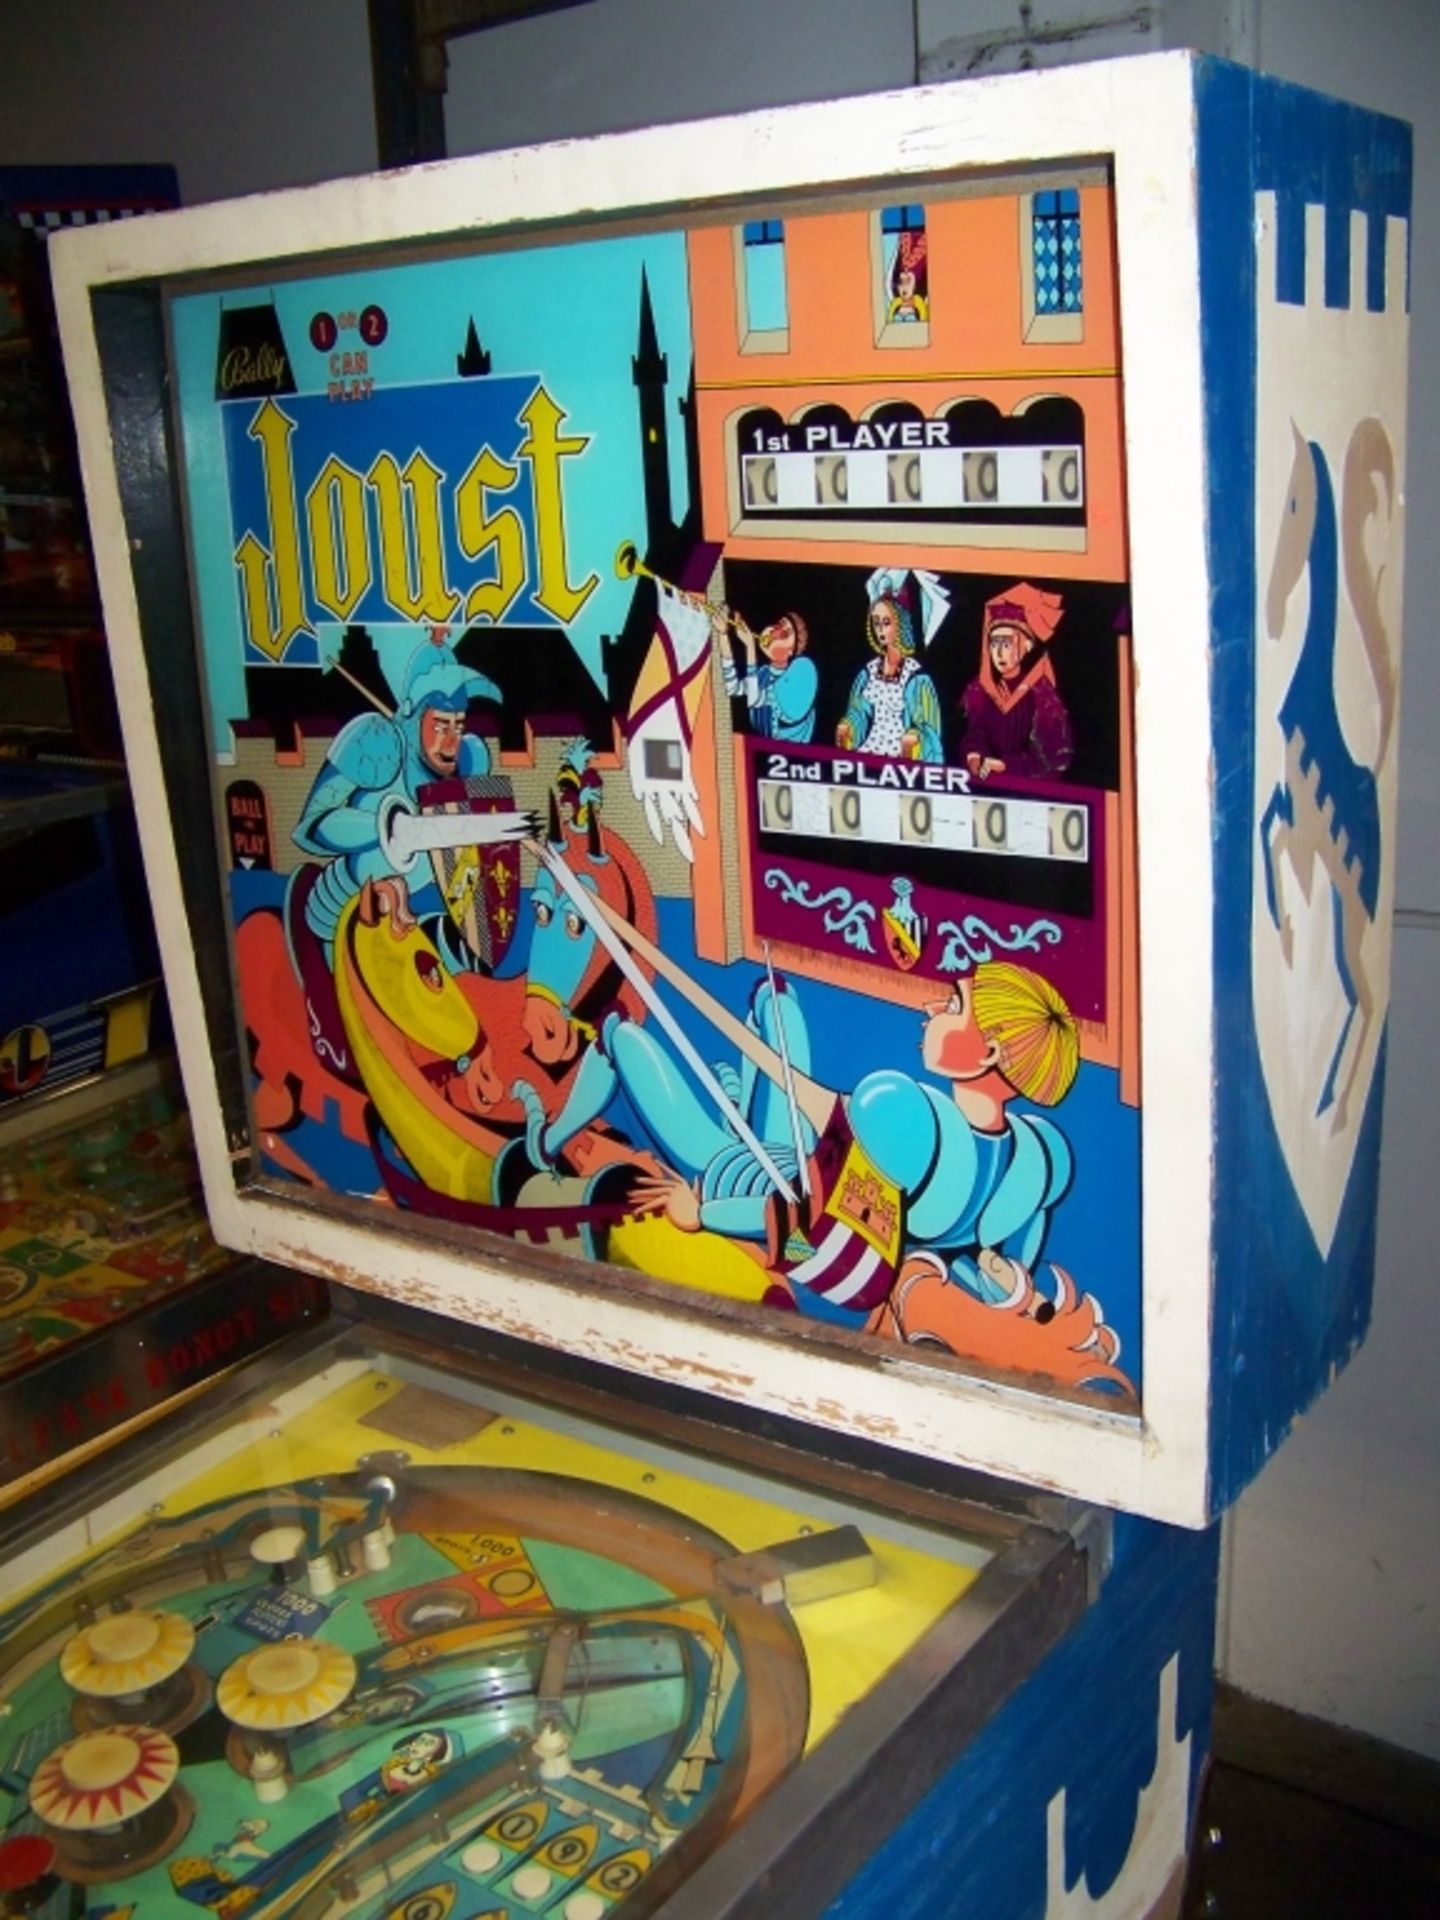 JOUST CLASSIC PINBALL MACHINE BALLY 1969 Item is in used condition. Evidence of wear and - Image 5 of 6